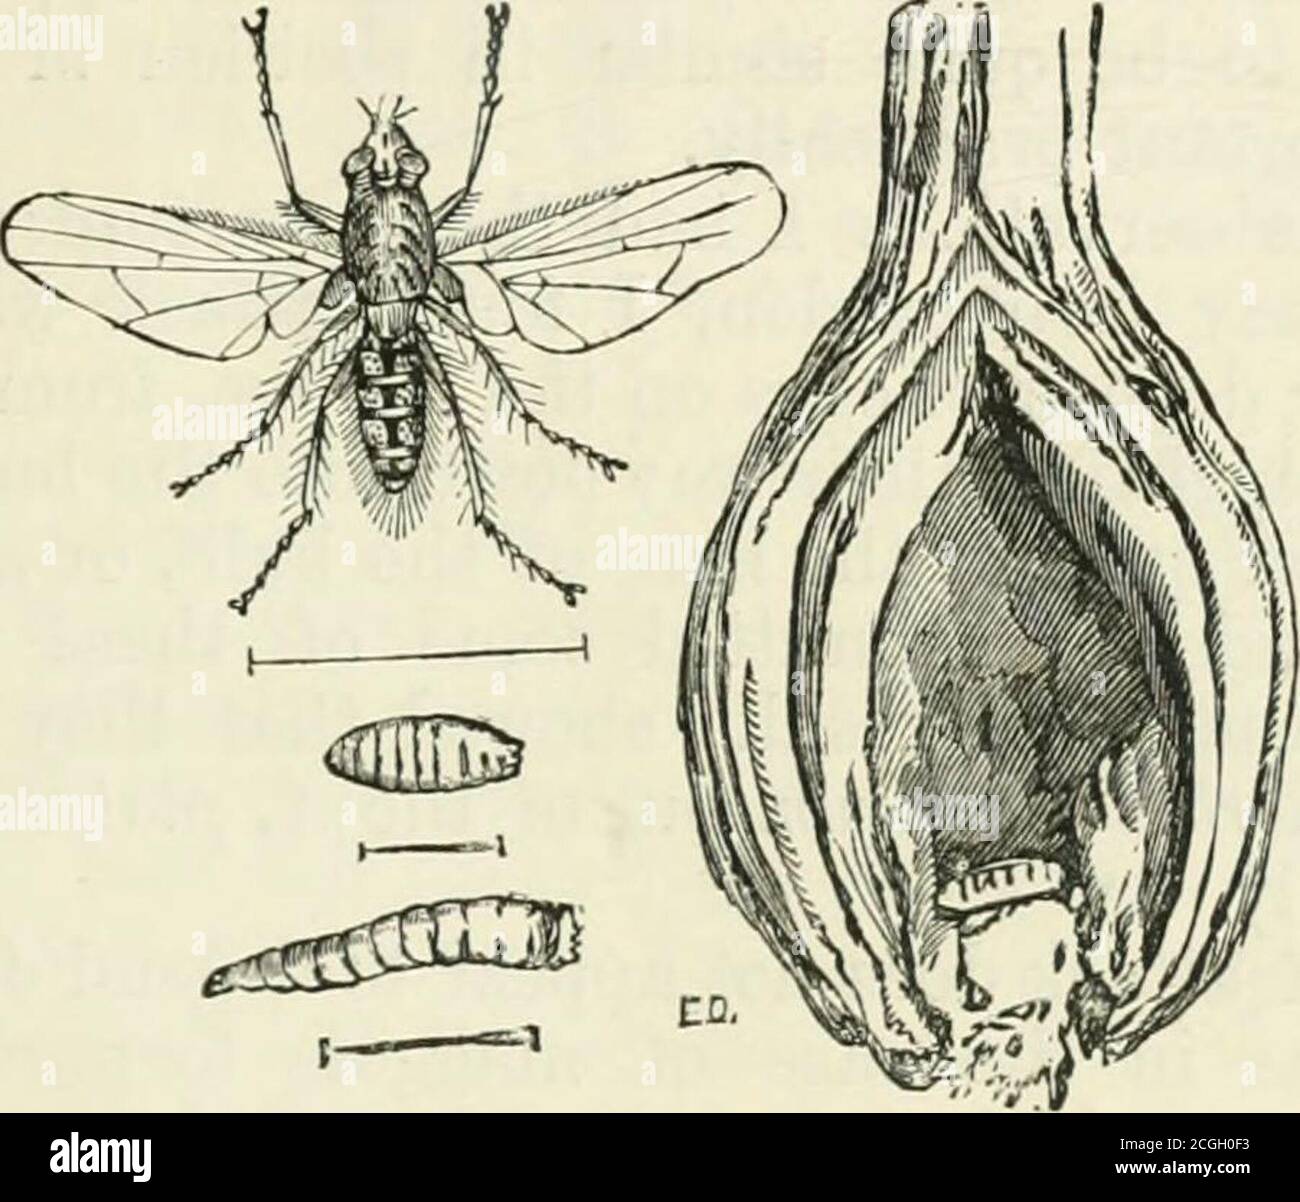 . A manual of injurious insects with methods of prevention and remedy for their attacks to food crops, forest trees, and fruit. To which is appended a short introduction to entomology . ^ Ceiitorhijnchus assimilis, Payk. : Beetle, maggot and chrysalis, nat. size andmagnified. Infested Turnip-pod. ONION. Onion Fly. Anthonn/ui ceparum, Bouche. = Phorbia cepetonim,Meade. Shallot Fly. Anthounjia platura, Meigen. The injury in this case is caused by the maggots of theOnion Fly feeding inside the Onion-bulbs, which partly fromthe quantity gnawed away, and partly from the decay causedby the workings, Stock Photo